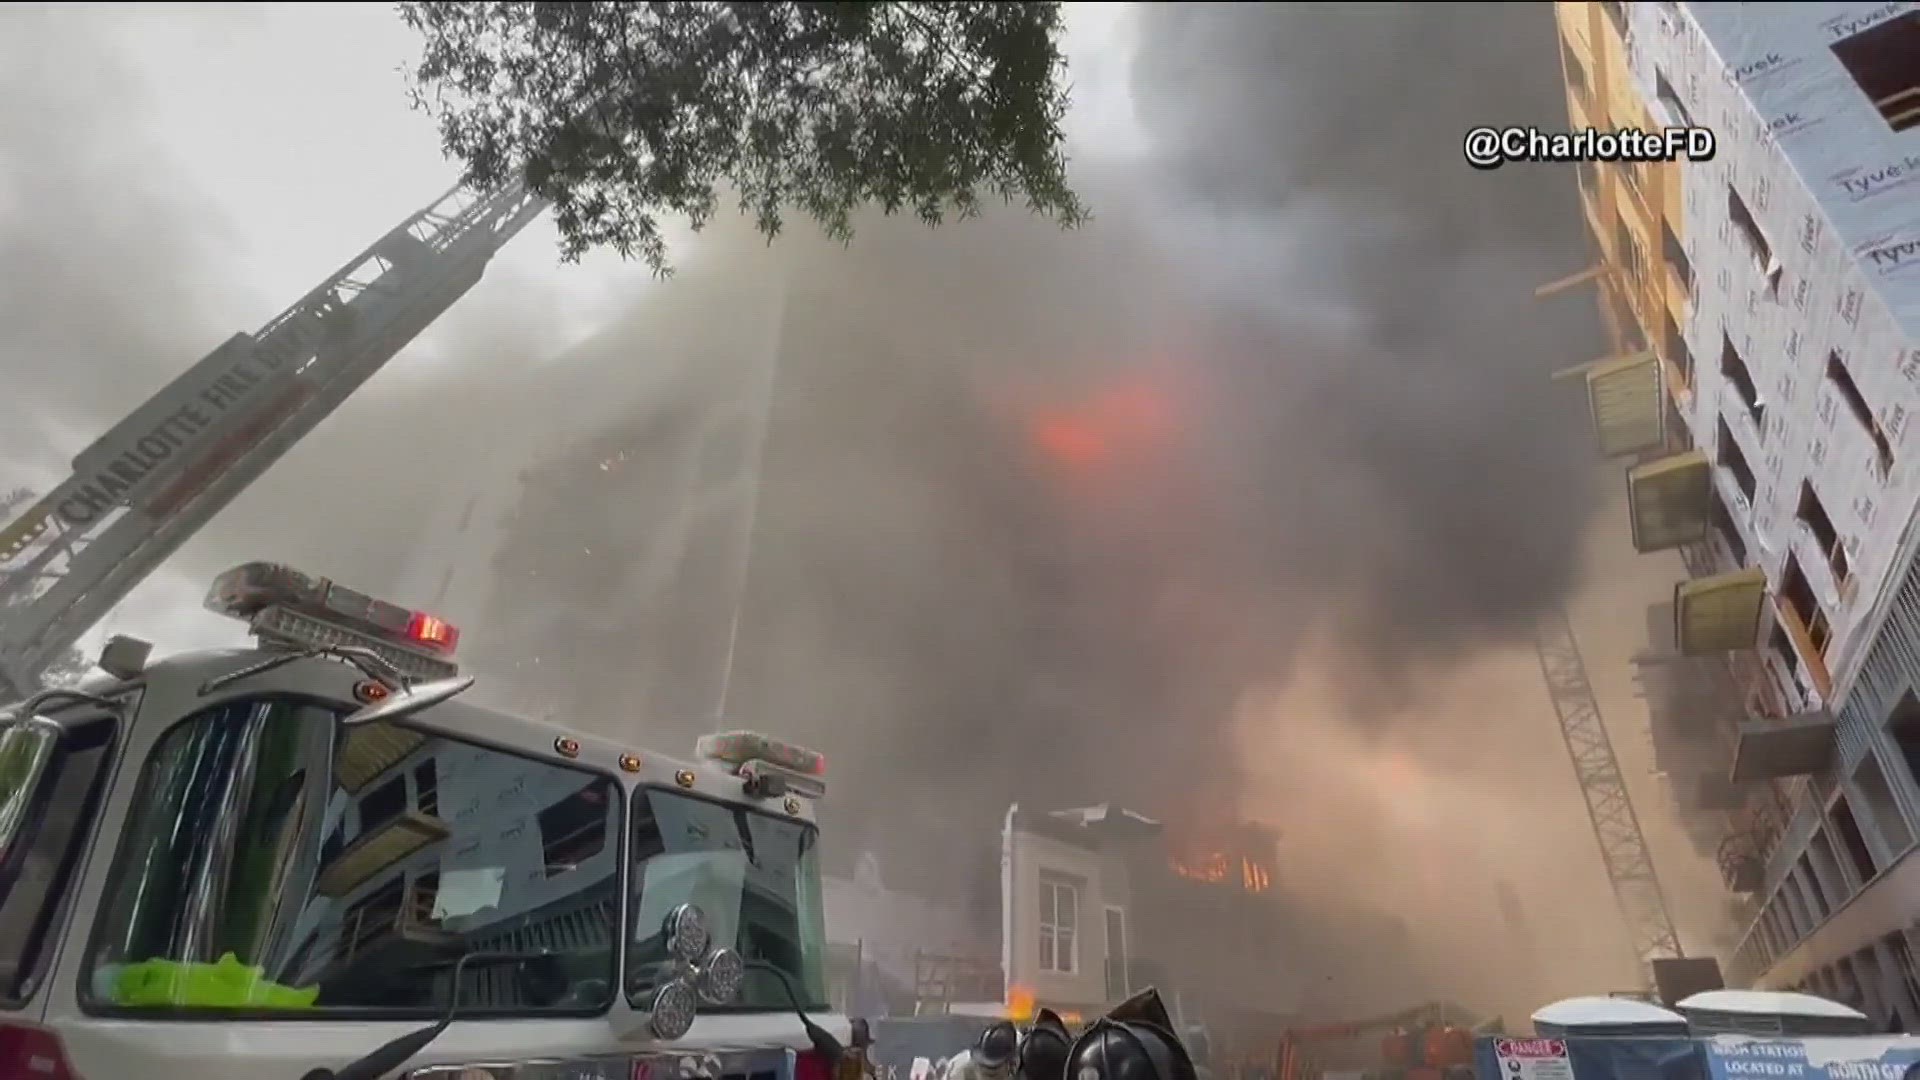 Officials said firefighters were tasked with extinguishing the "very fast-moving" fire, which had high-heat conditions of well over 2,000 degrees.